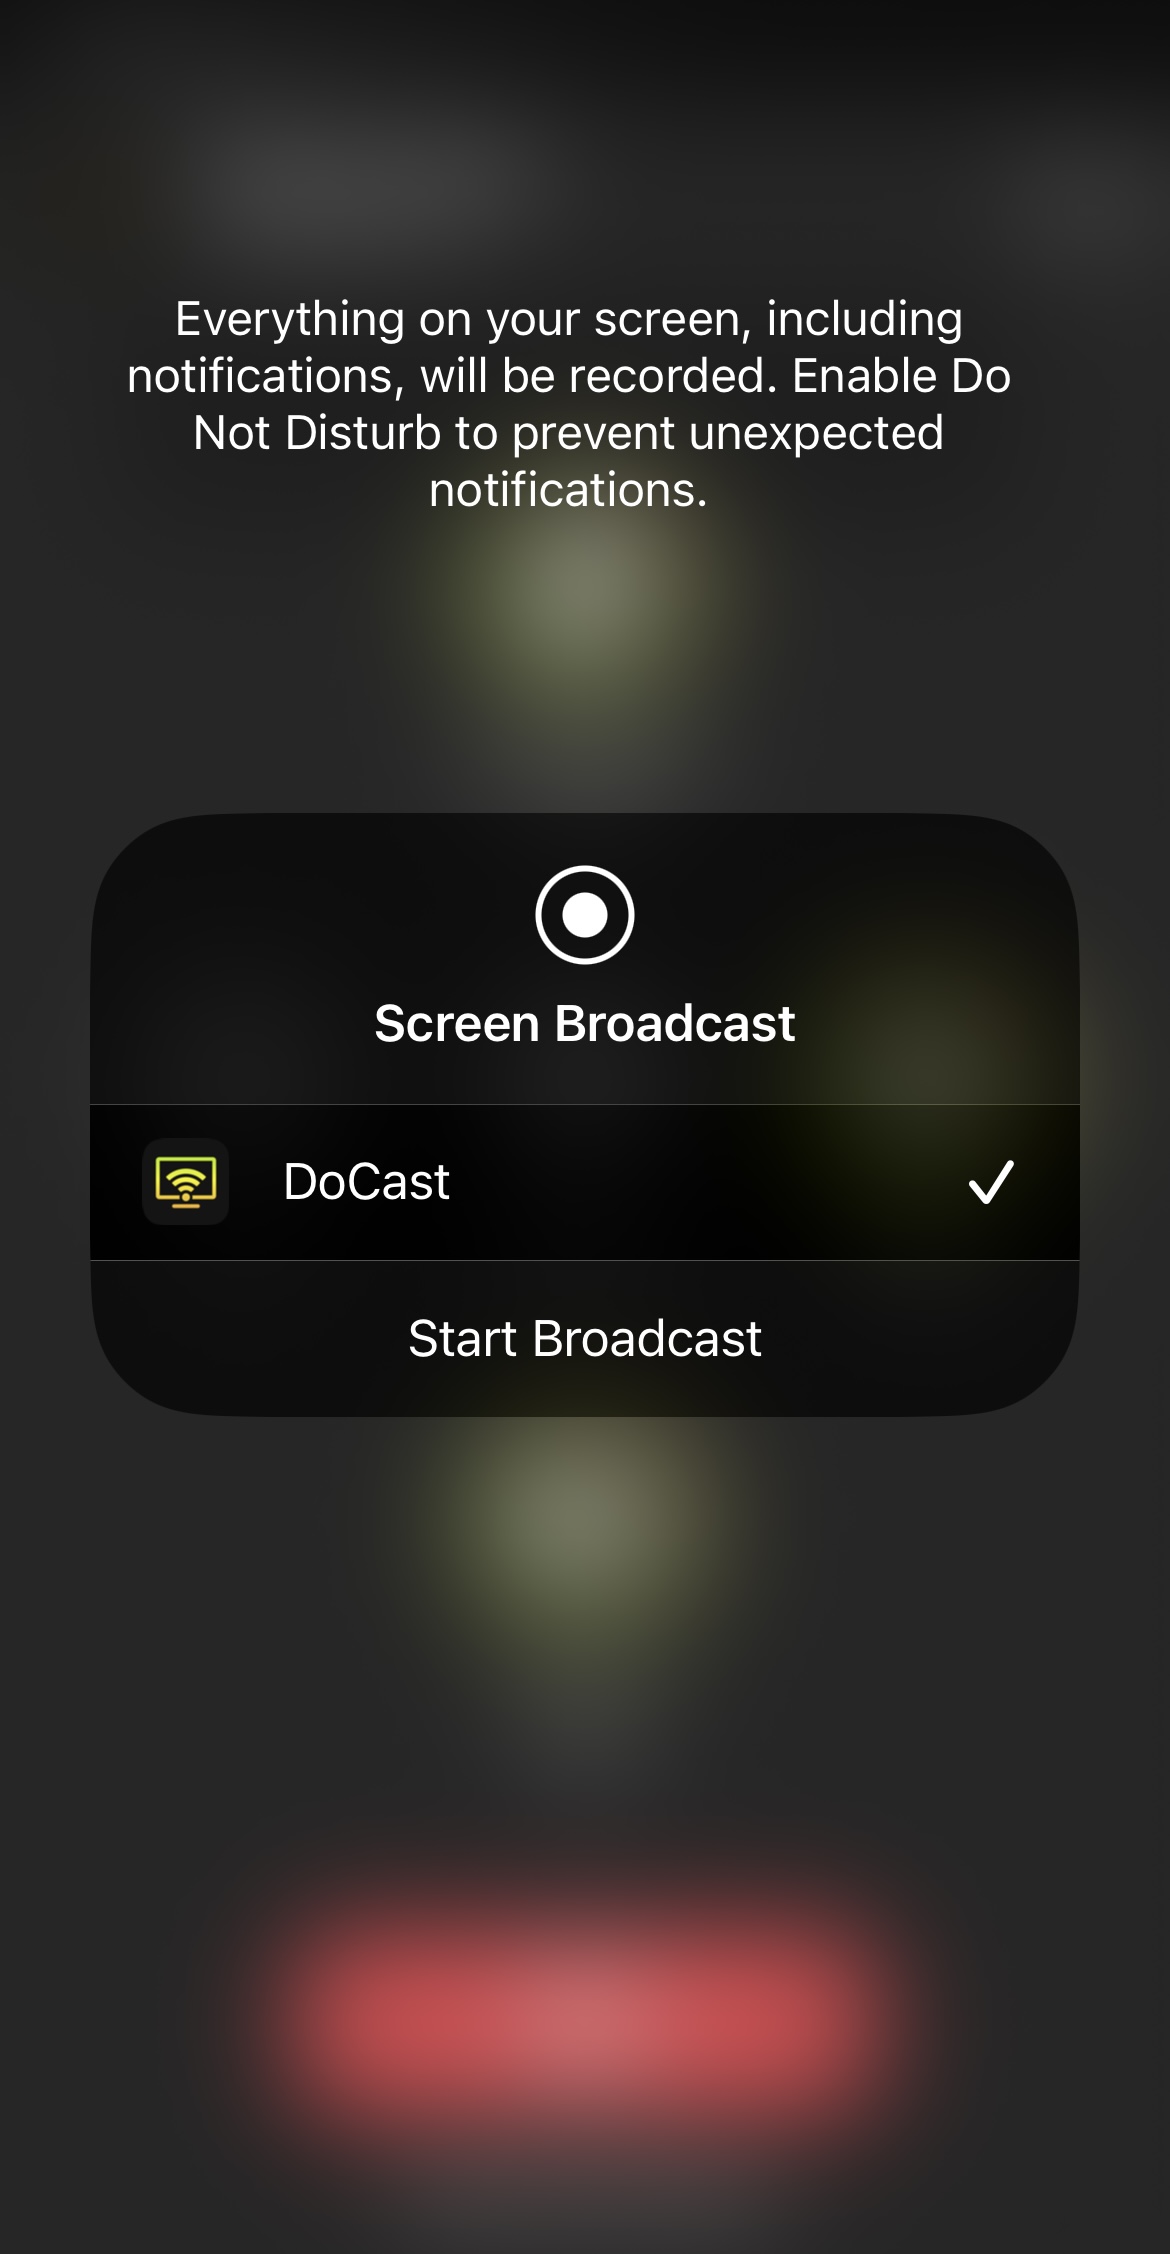 Mirroring iPhone's screen to TV with DoCast